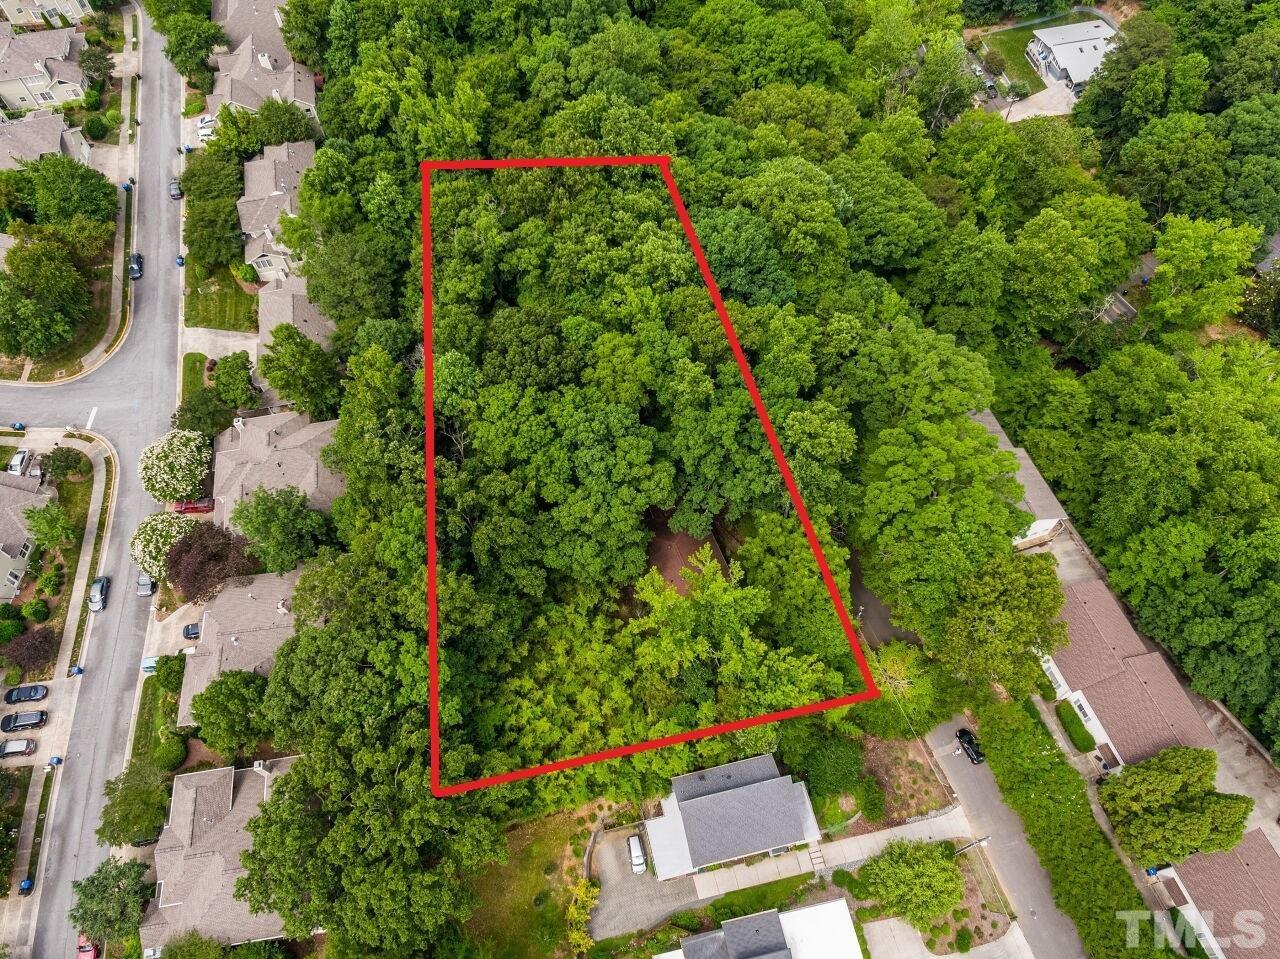 Rare development opportunity this close to downtown and UNC! 1.18 acres at the end of a quiet street waiting to be utilized! Develop into small lots or multifamily. Price points for neighboring detached homes in the mid $5 and $600's. Adjacent duplex homes sell in the mid $3 and $400's per unit. The town says build a turn around to make multiple lots and do what you want. Setting and location are unsurpassed. A canvas waiting to be built! The existing home is solid and livable with pretty views as-is, needs updating.